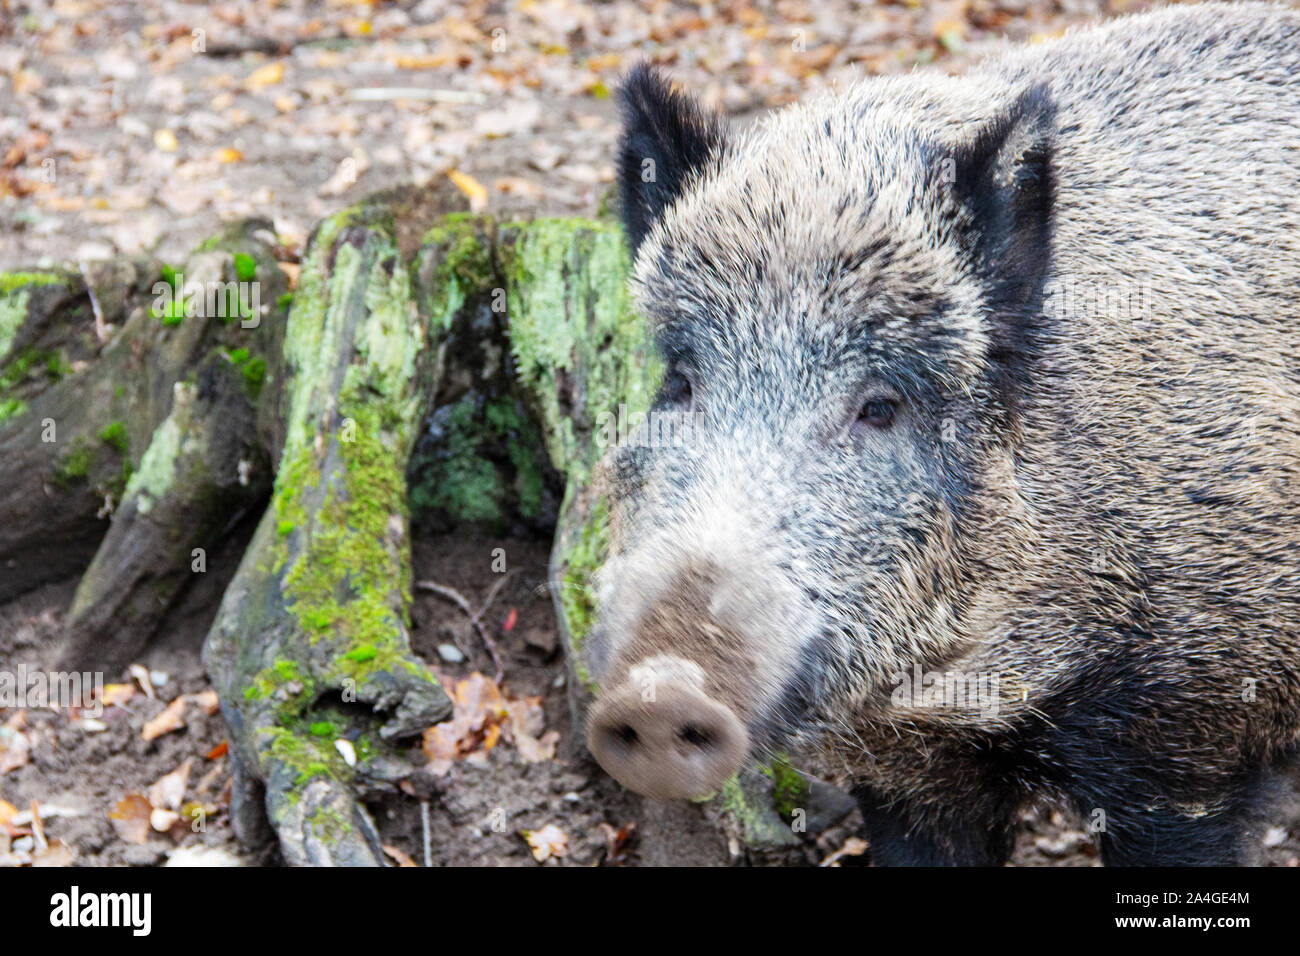 Head view of a wild boar next to a tree stump, Sus scrofa Stock Photo